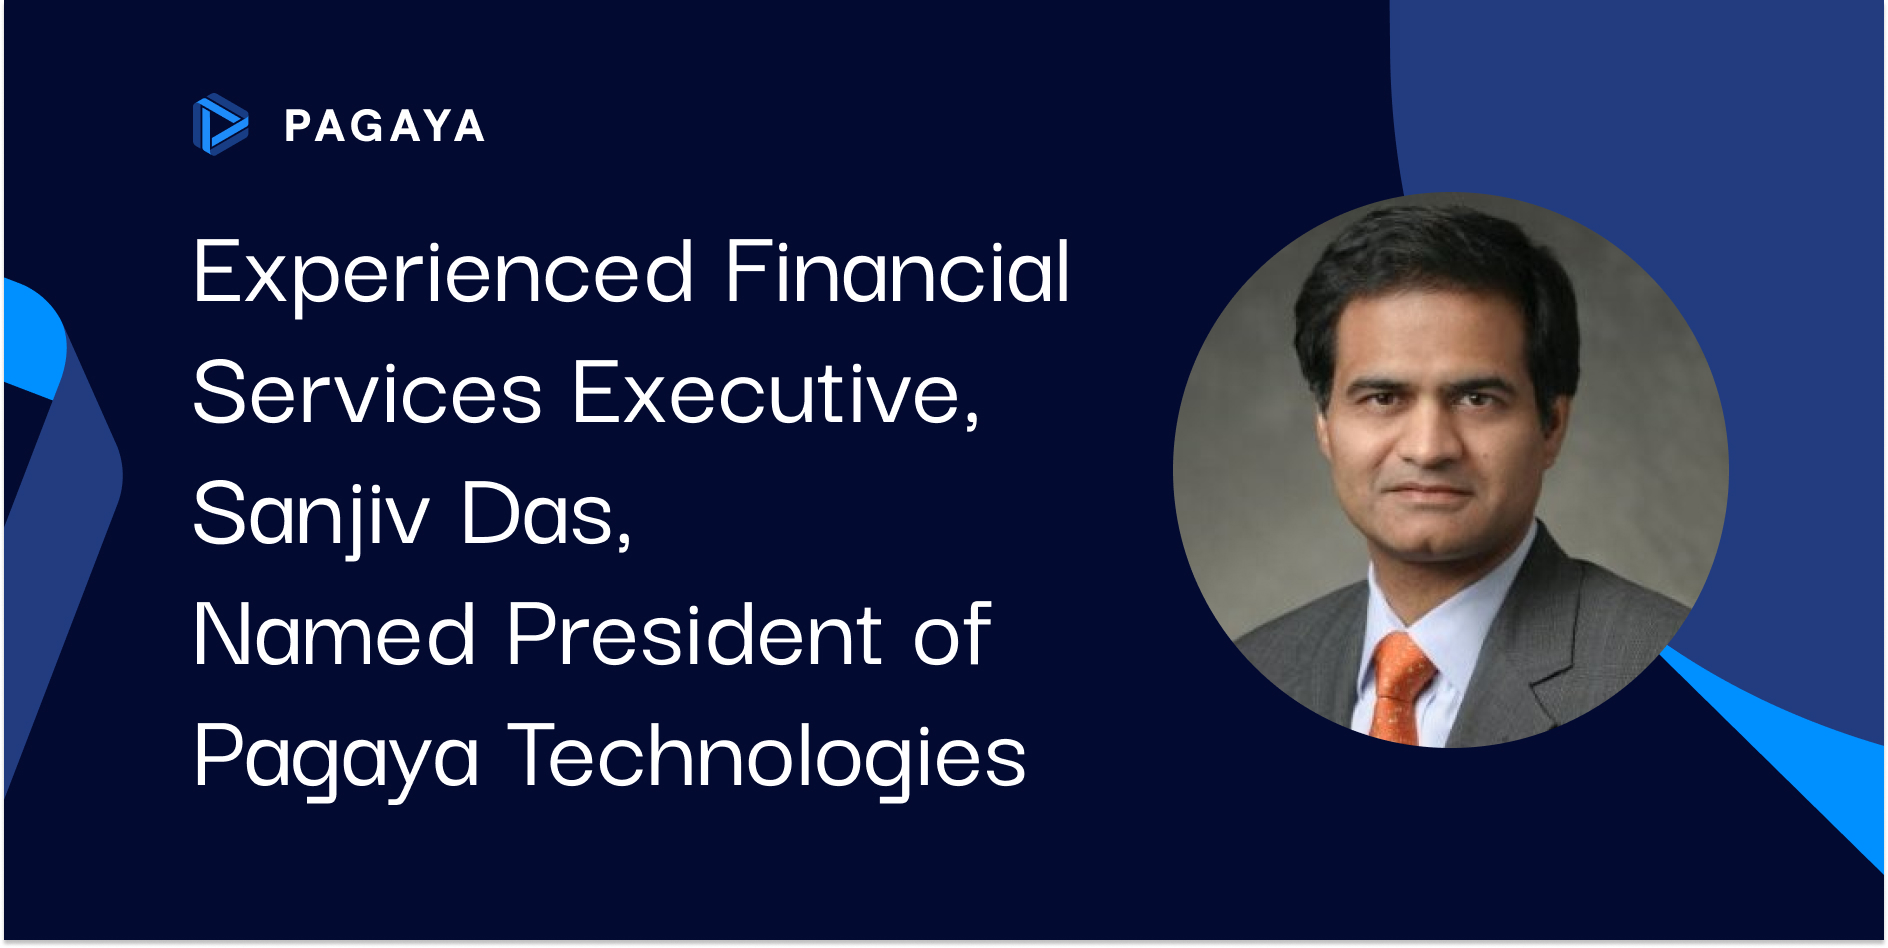 Experienced Financial Services Executive and Former CEO of Caliber Home Loans, Sanjiv Das, Named President of Pagaya Technologies